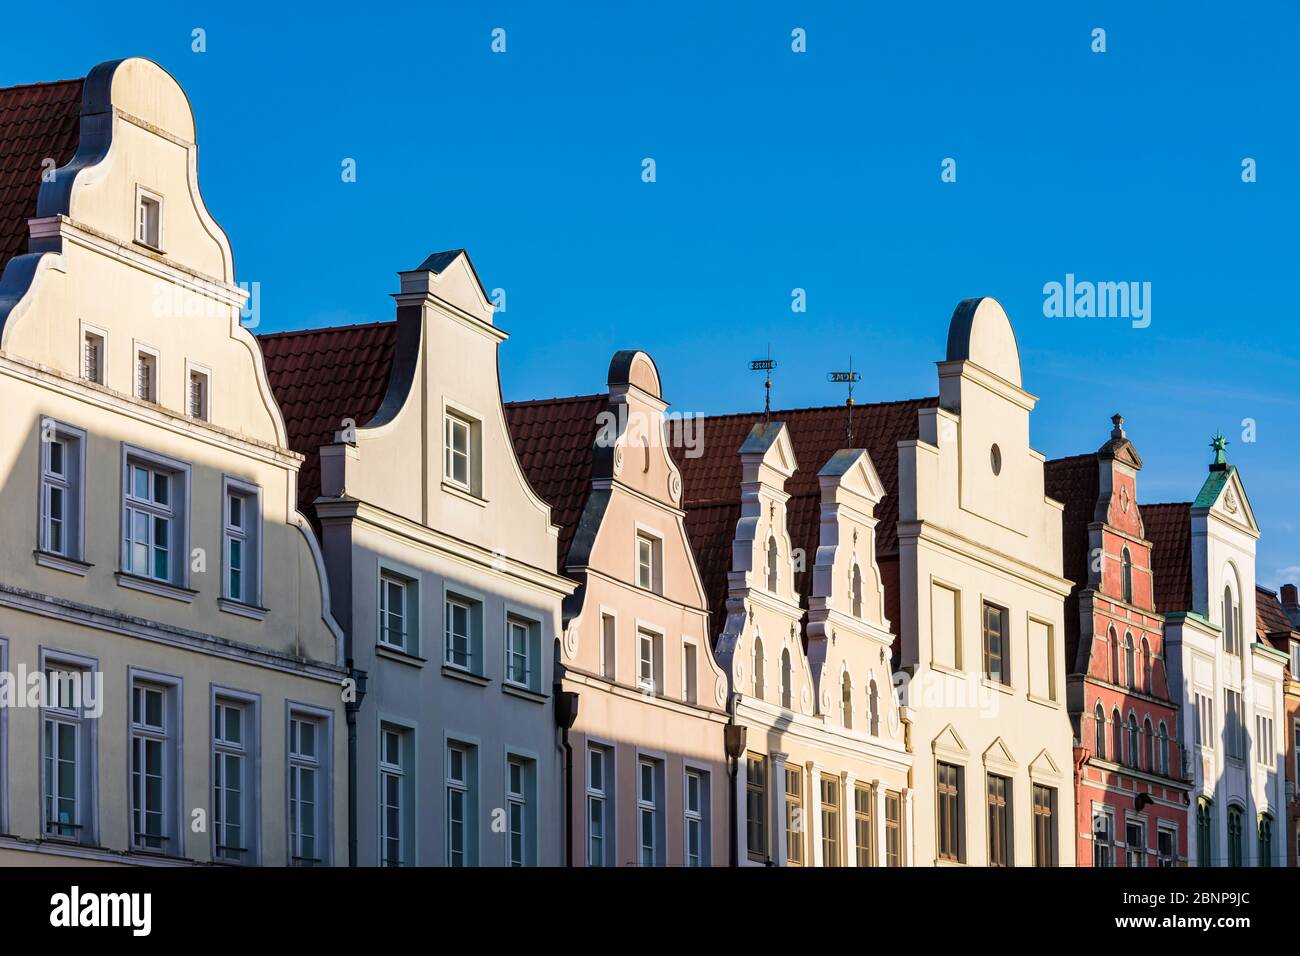 Germany, Mecklenburg-West Pomerania, Wismar, Hanseatic City, old town, historic houses, row of houses, house facade Stock Photo